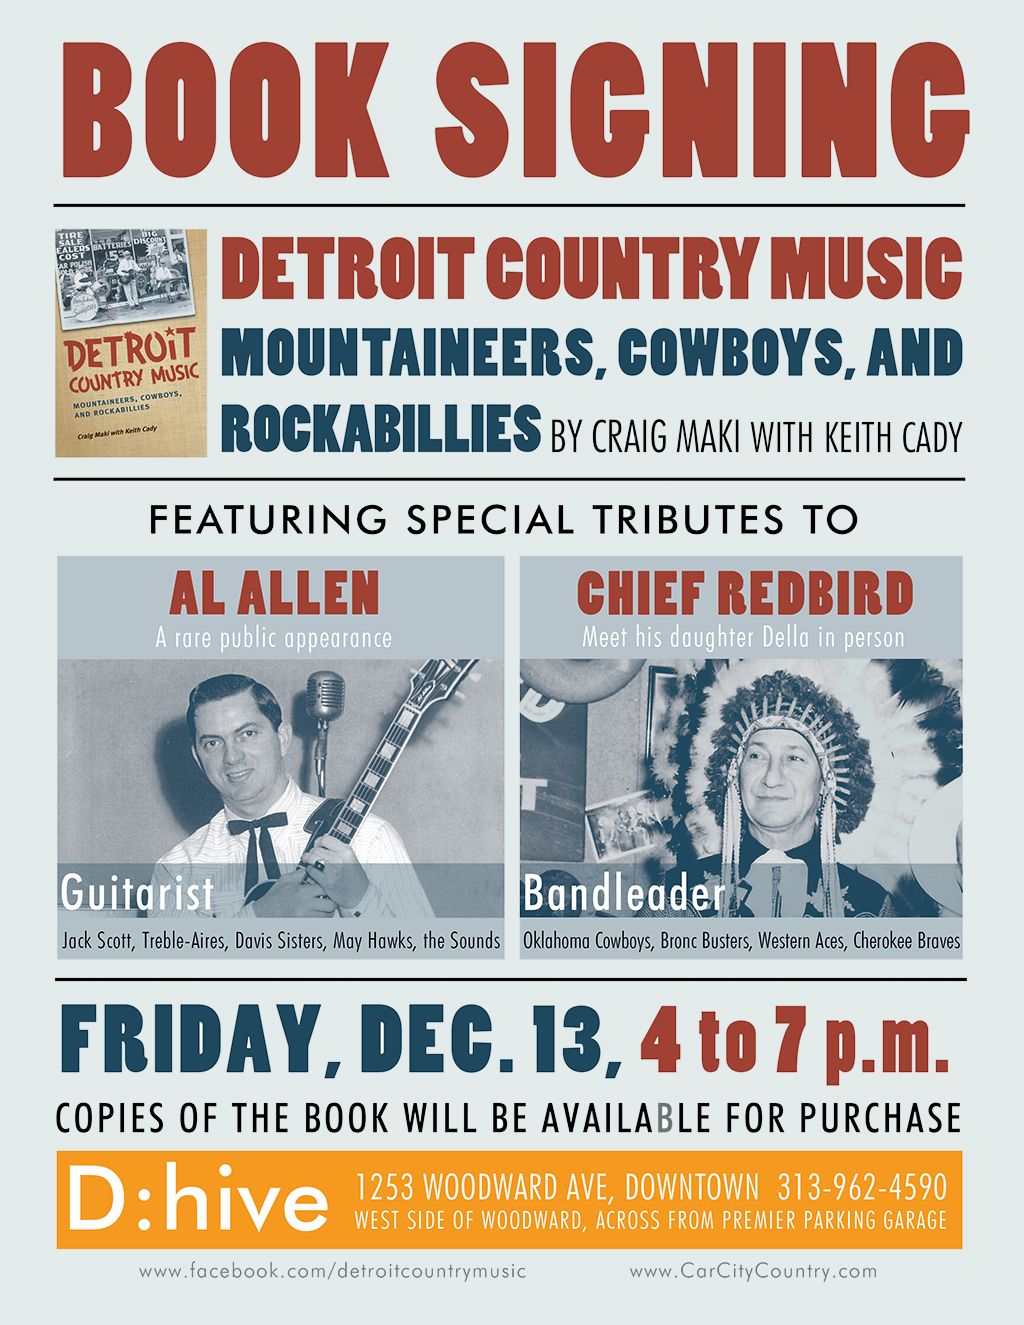 Book signing featuring Chief Redbird's daughter and Al Allen, Dec. 13, 2013, 4 to 6 p.m. at D:hive in downtown Detroit, Michigan